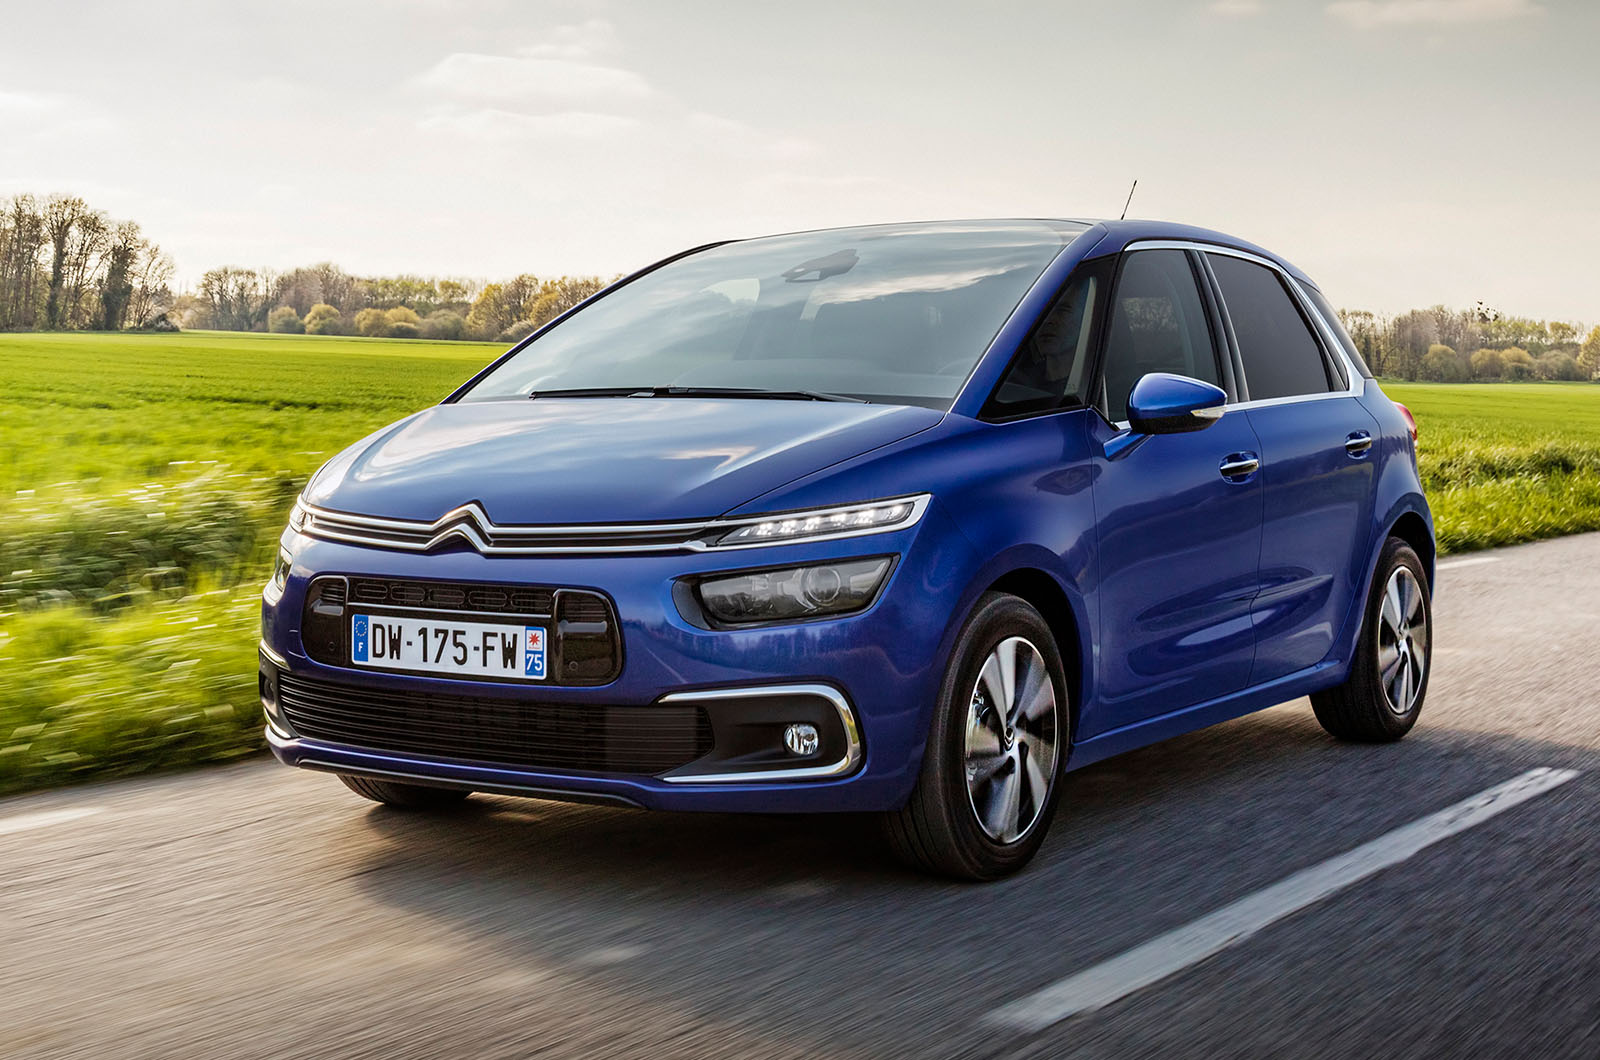 Citroën C4 Picasso and Grand C4 Picasso pricing and sale date revealed